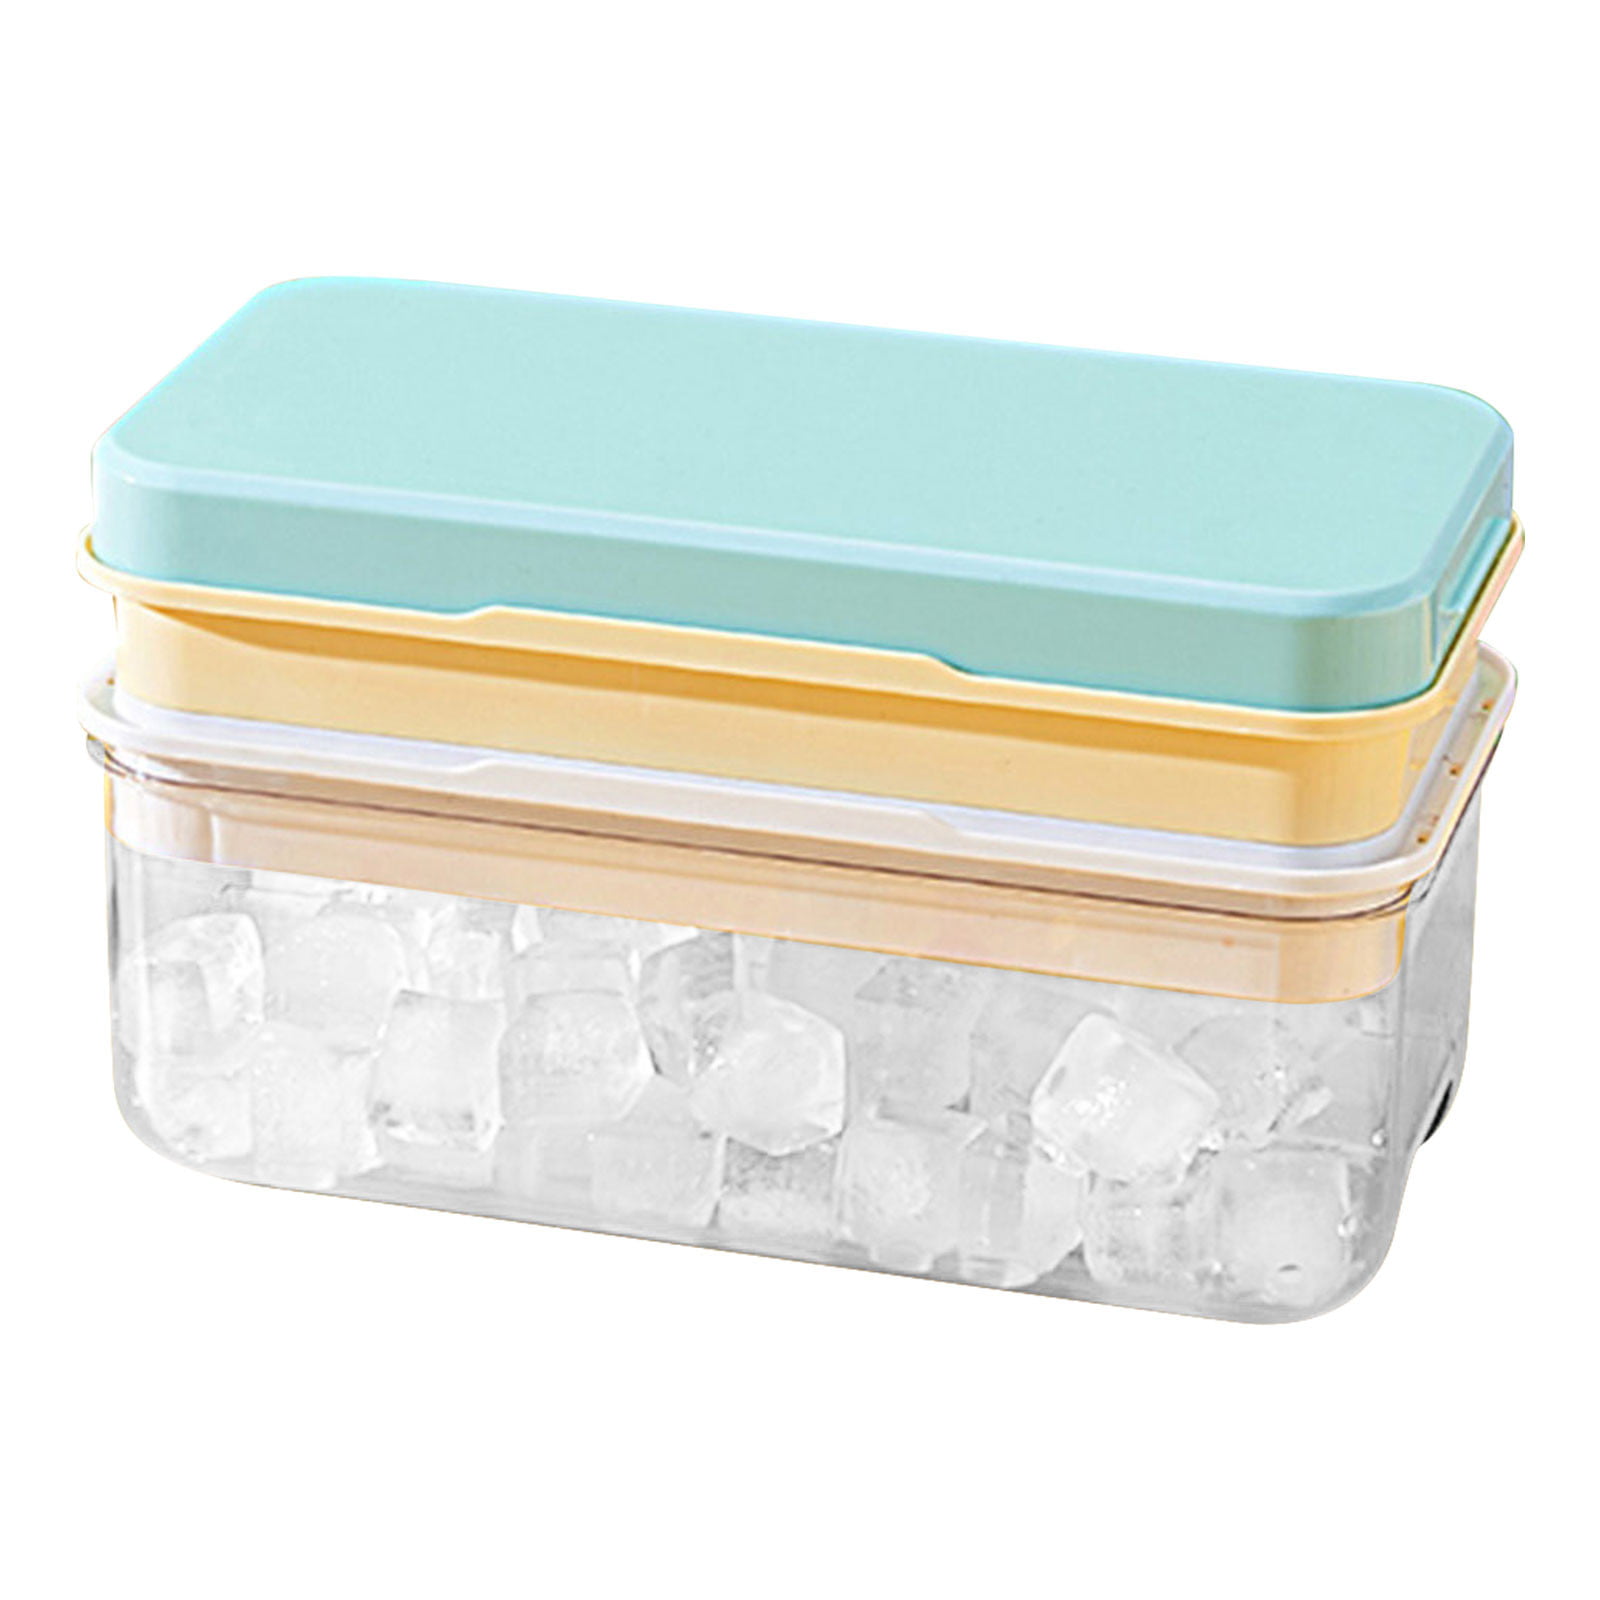  ZTML MS Ice Cube Tray, Upgraded Ice Cube Tray with Lid